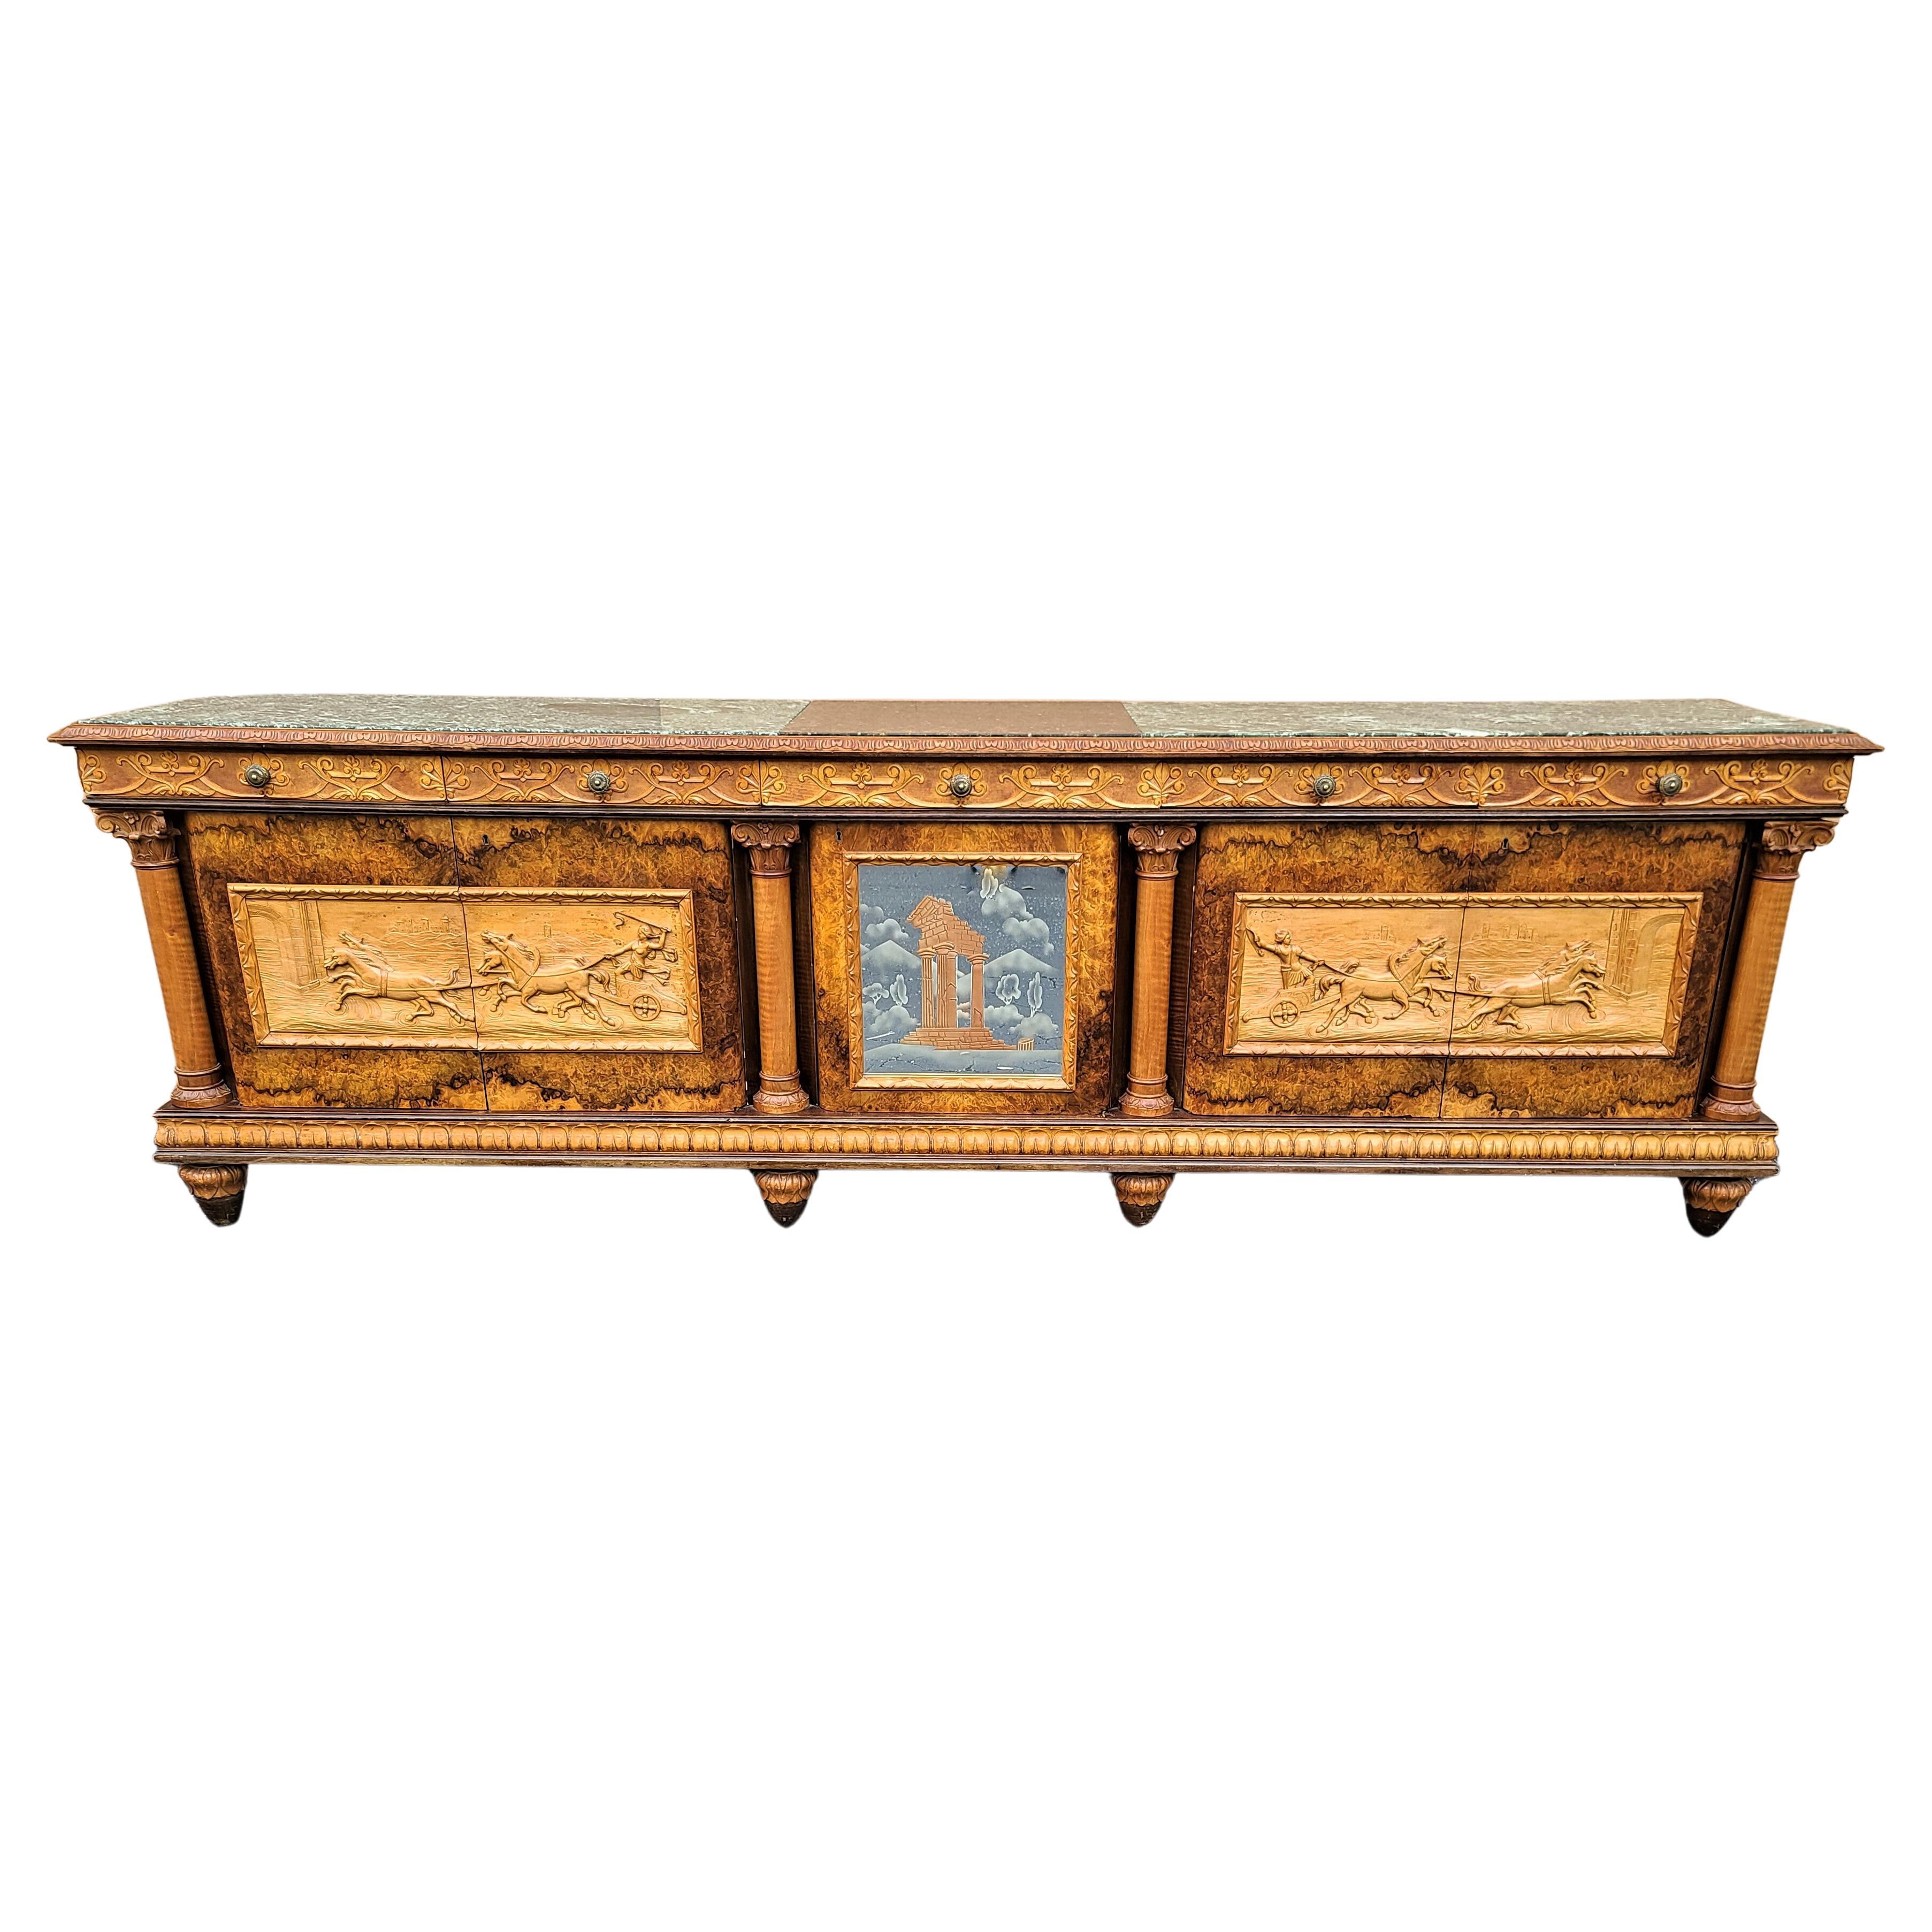 Antique c 1900 Hand Carved Neoclassical Italian Credenza Bar Cabinet For Sale